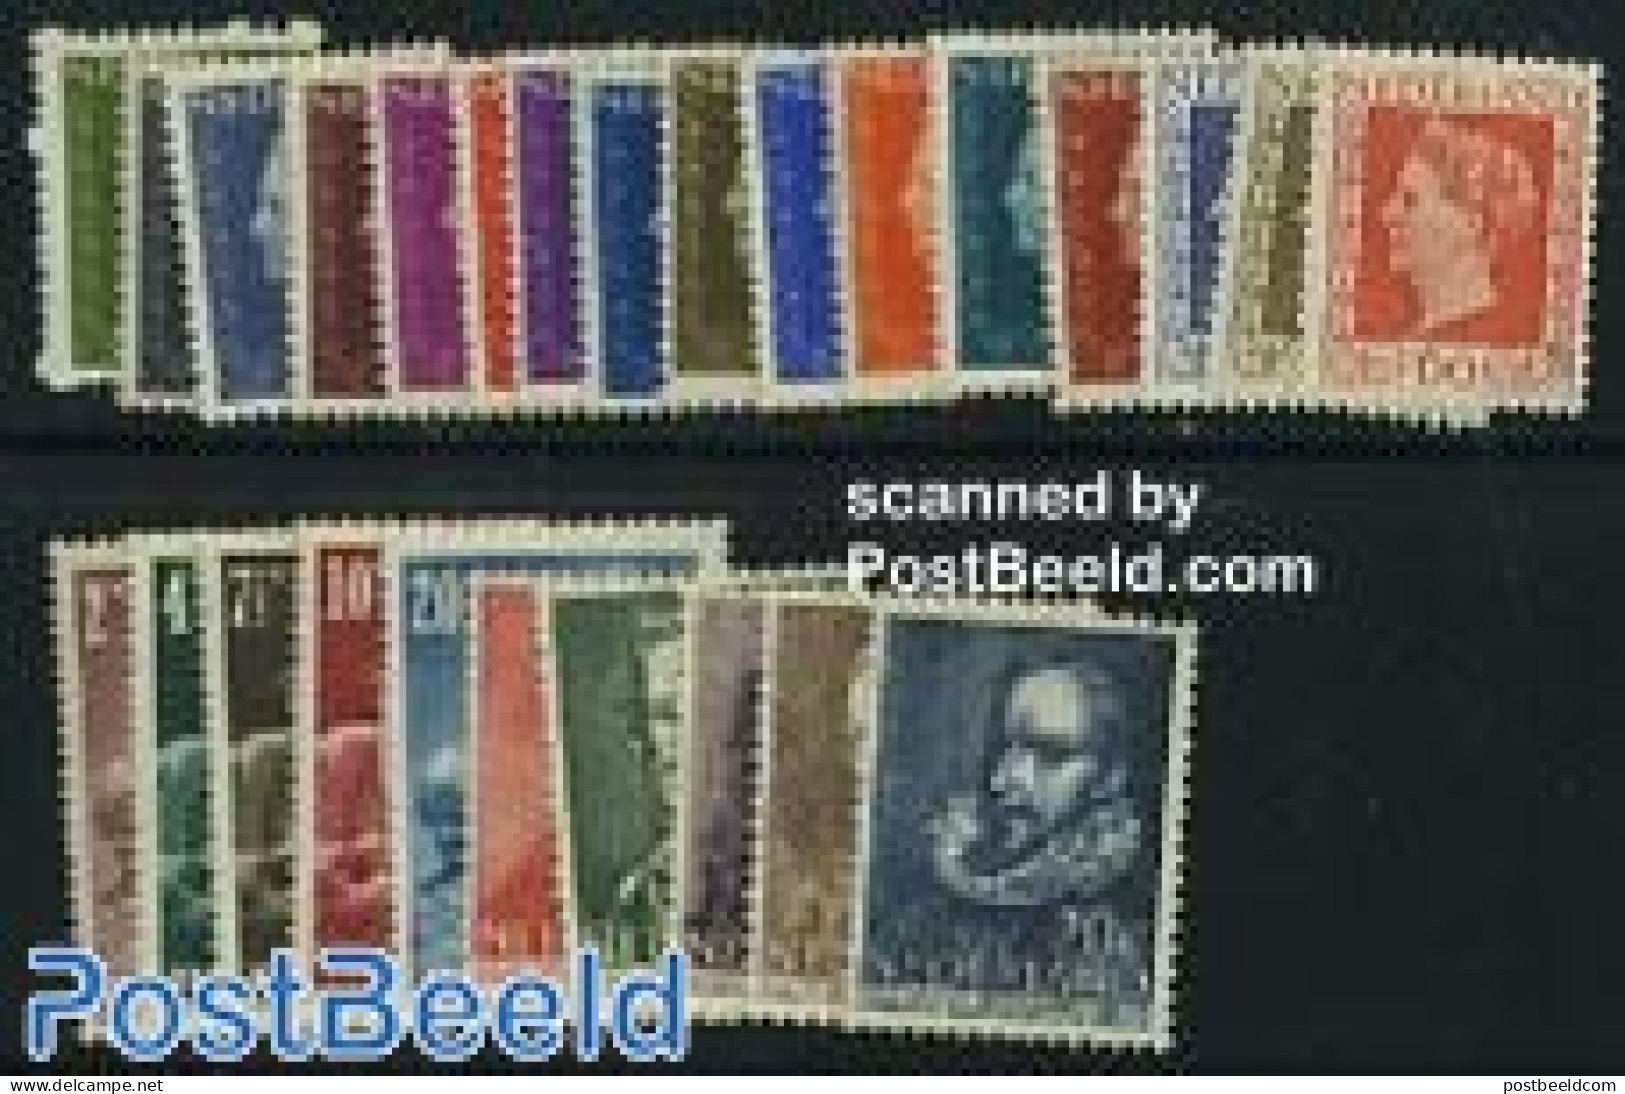 Netherlands 1947 Yearset 1947 (26v), Mint NH, Various - Yearsets (by Country) - Ungebraucht